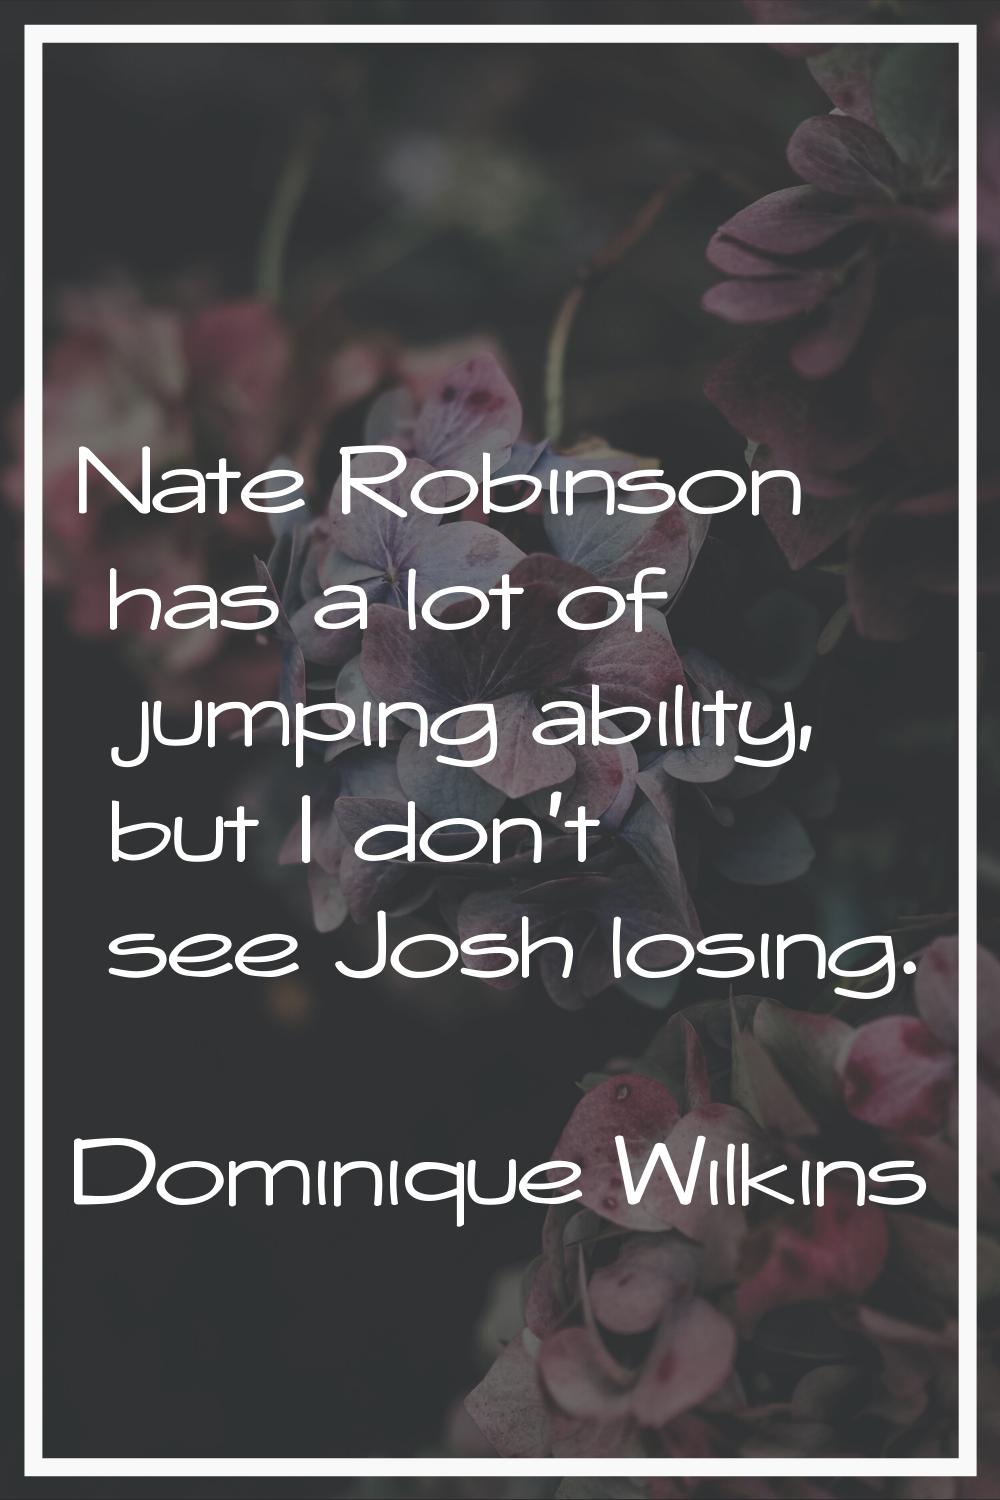 Nate Robinson has a lot of jumping ability, but I don't see Josh losing.